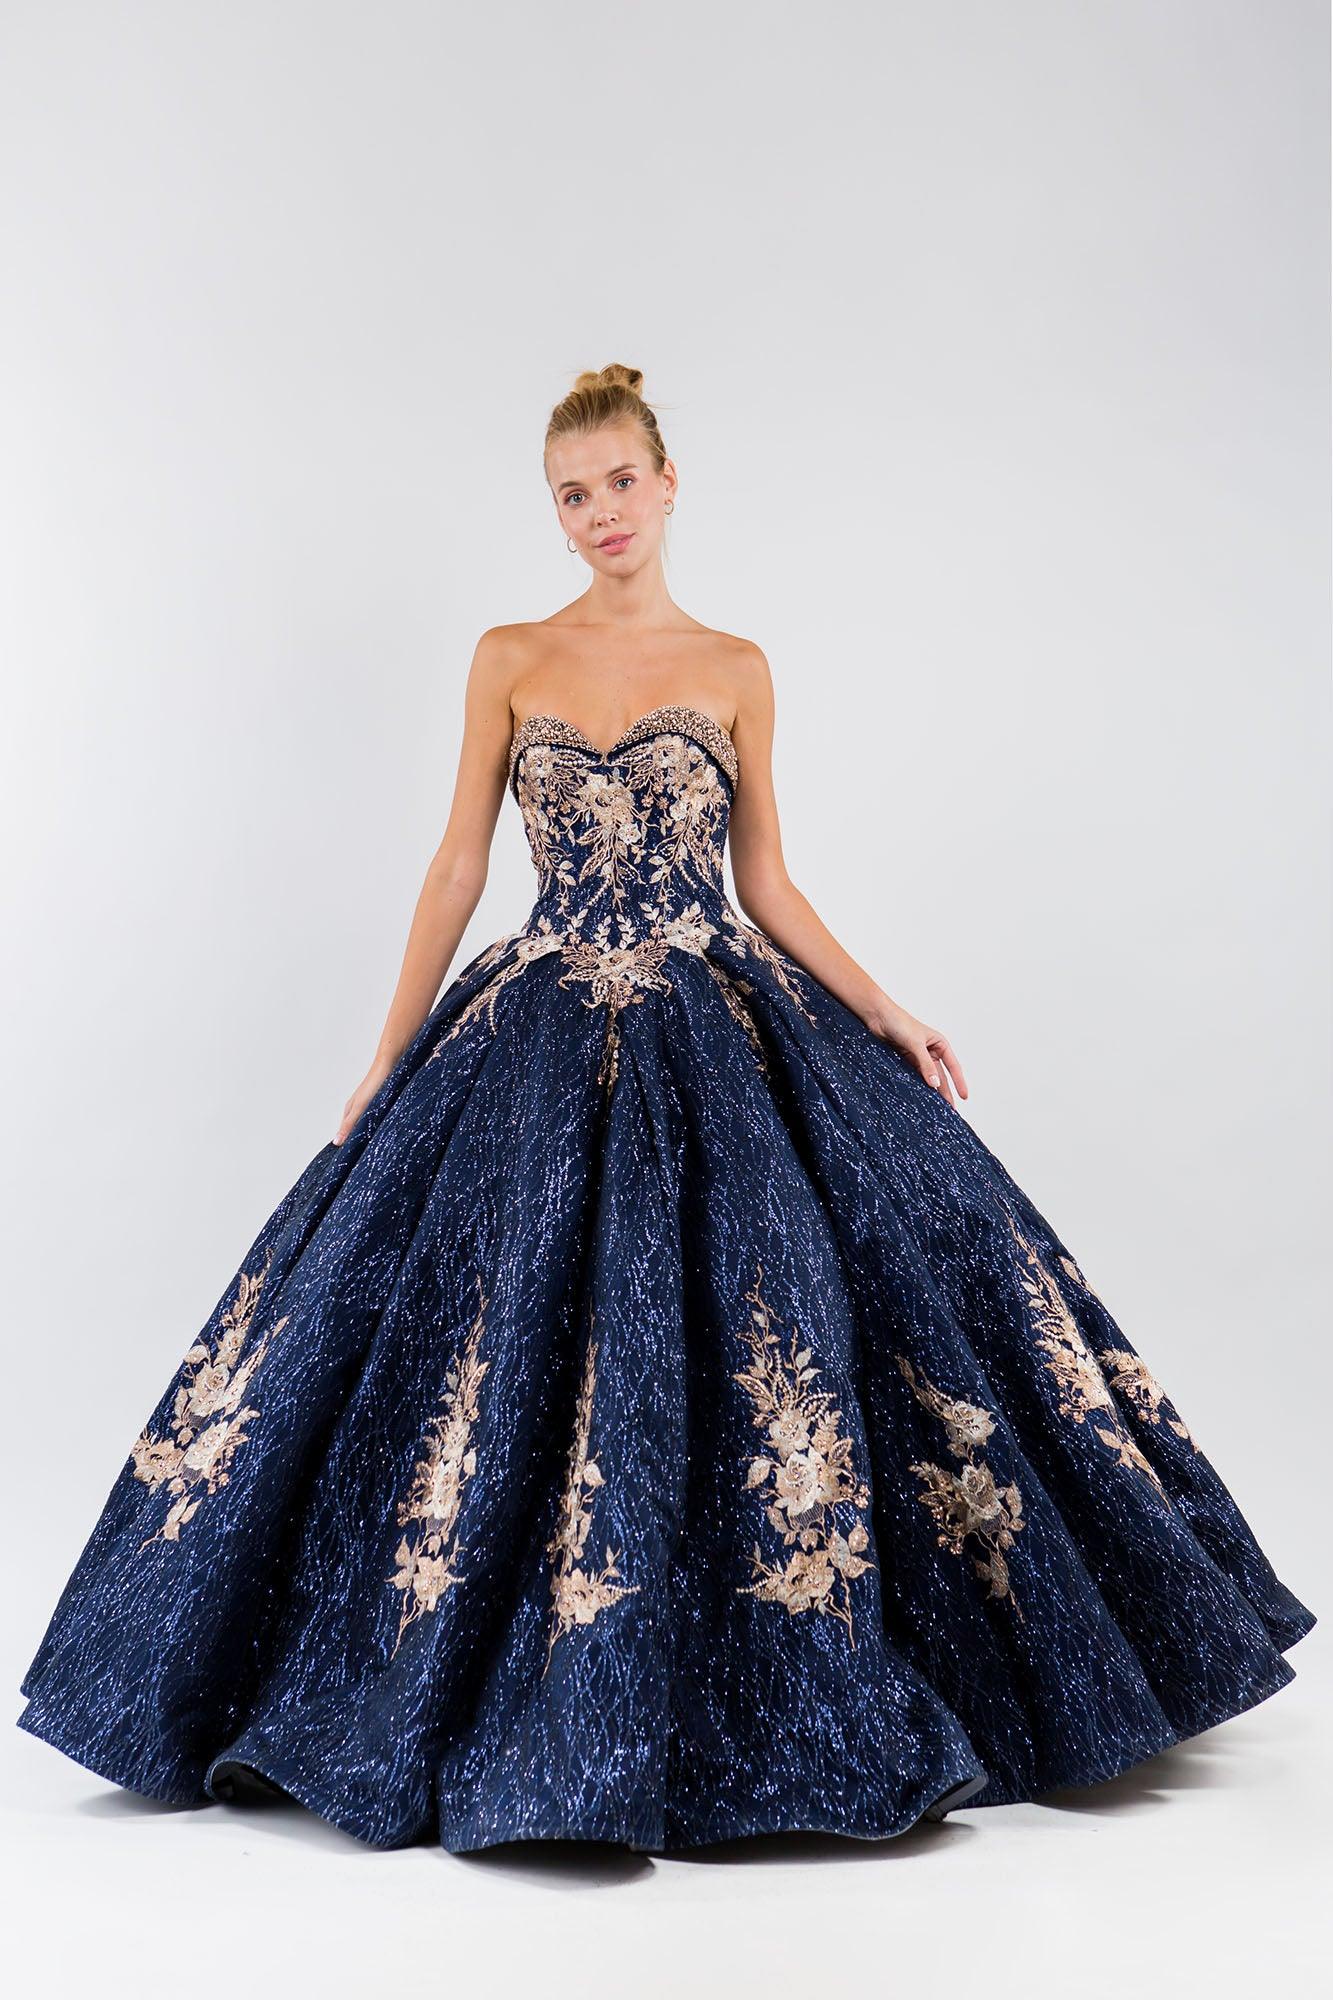 Quinceanera Floral Glitter Long Strapless Dress - The Dress Outlet